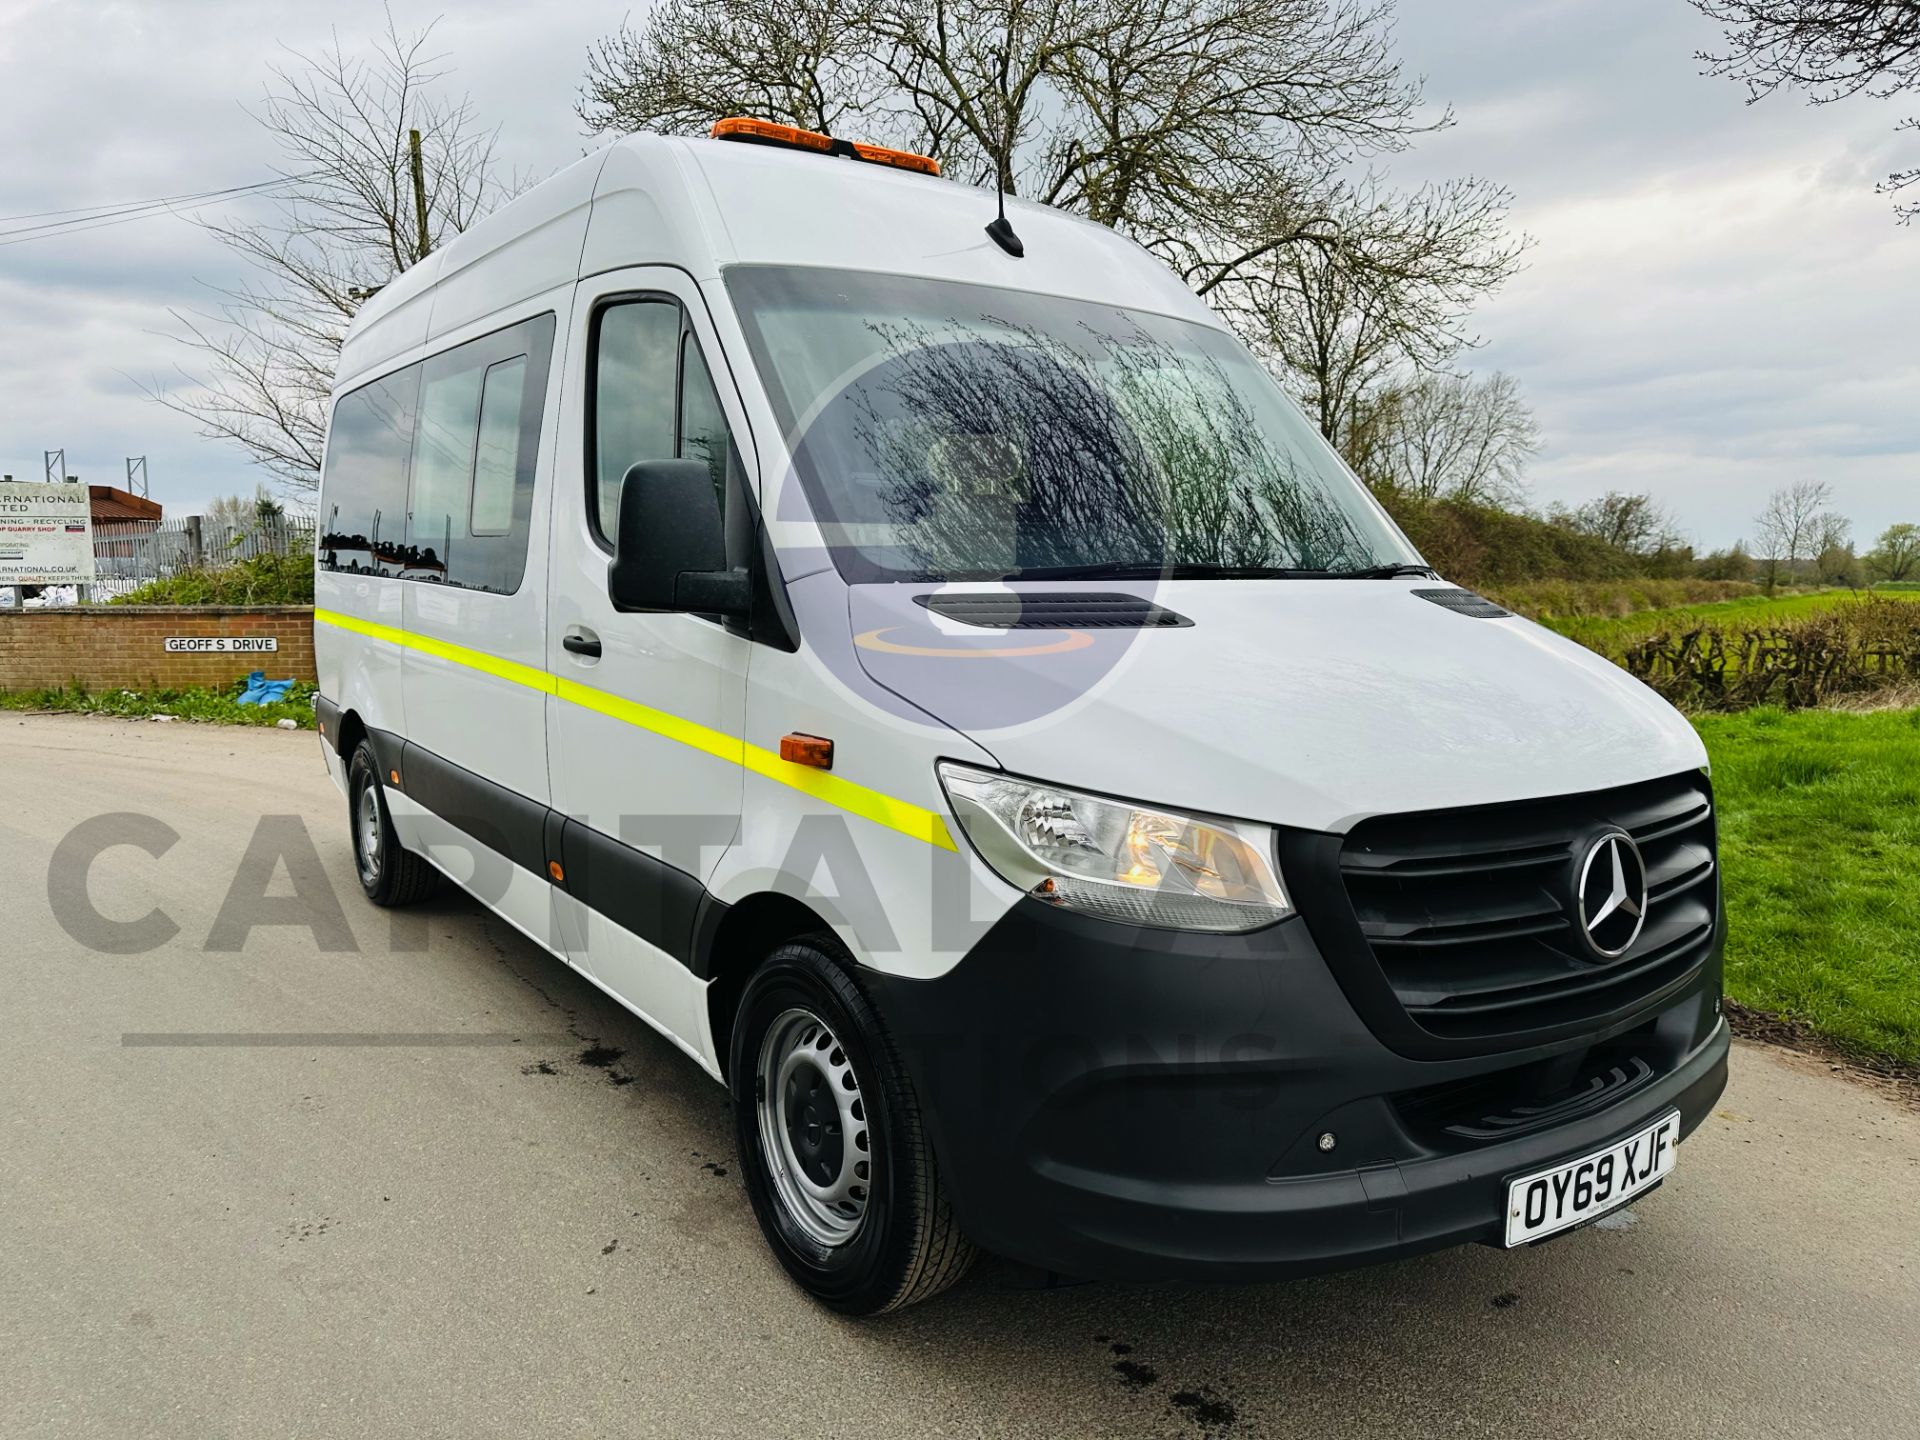 (ON SALE) MERCEDES SPRINTER 314CDI AUTO MWB MESSING UNIT WITH W/C,MICROWAVE,- 2020 REG- - AIR CON - Image 2 of 44